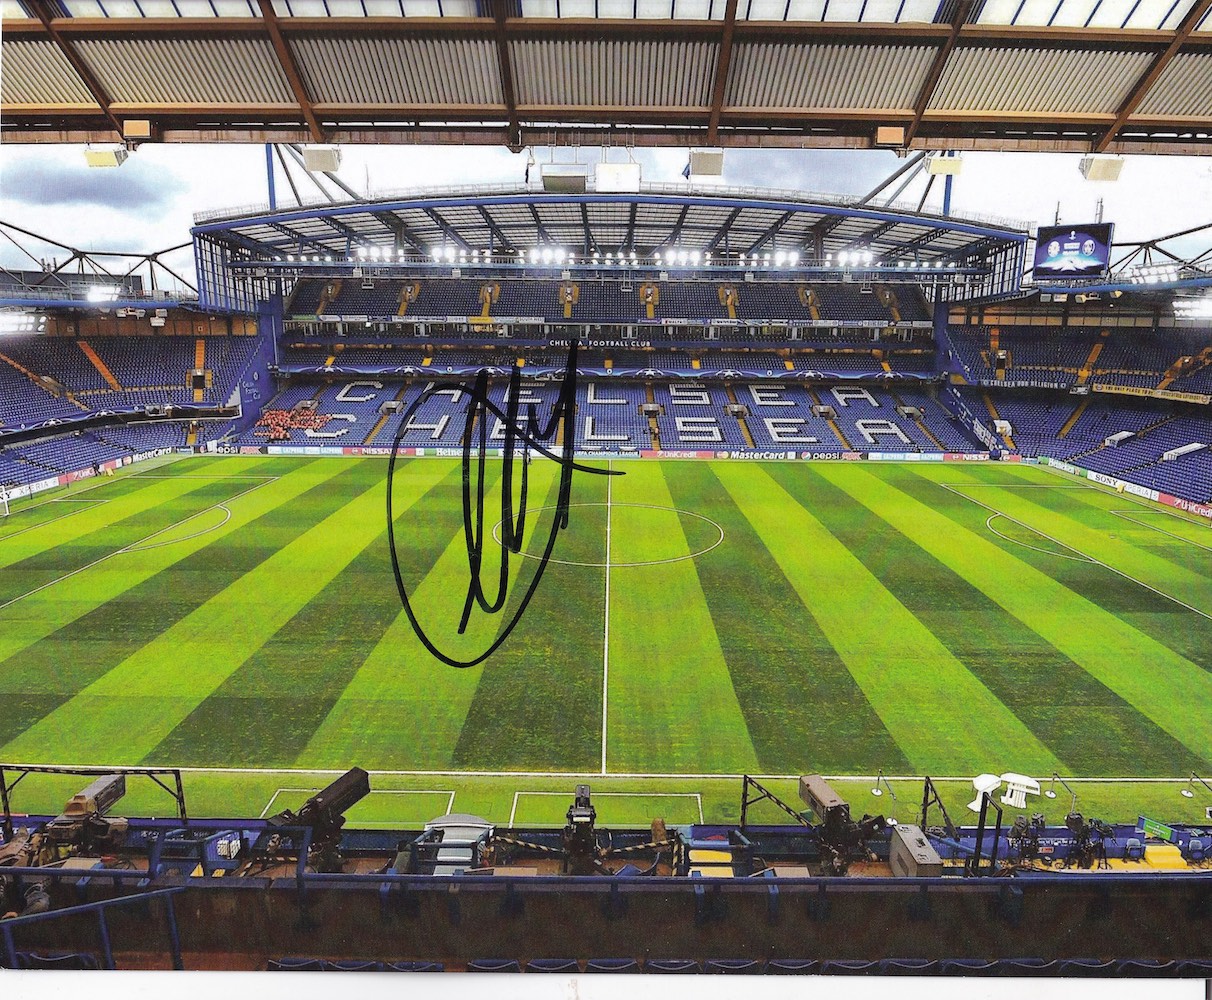 Mason Mount Chelsea Footballer 10x8 inch Signed Photo. Good Condition. All autographs come with a